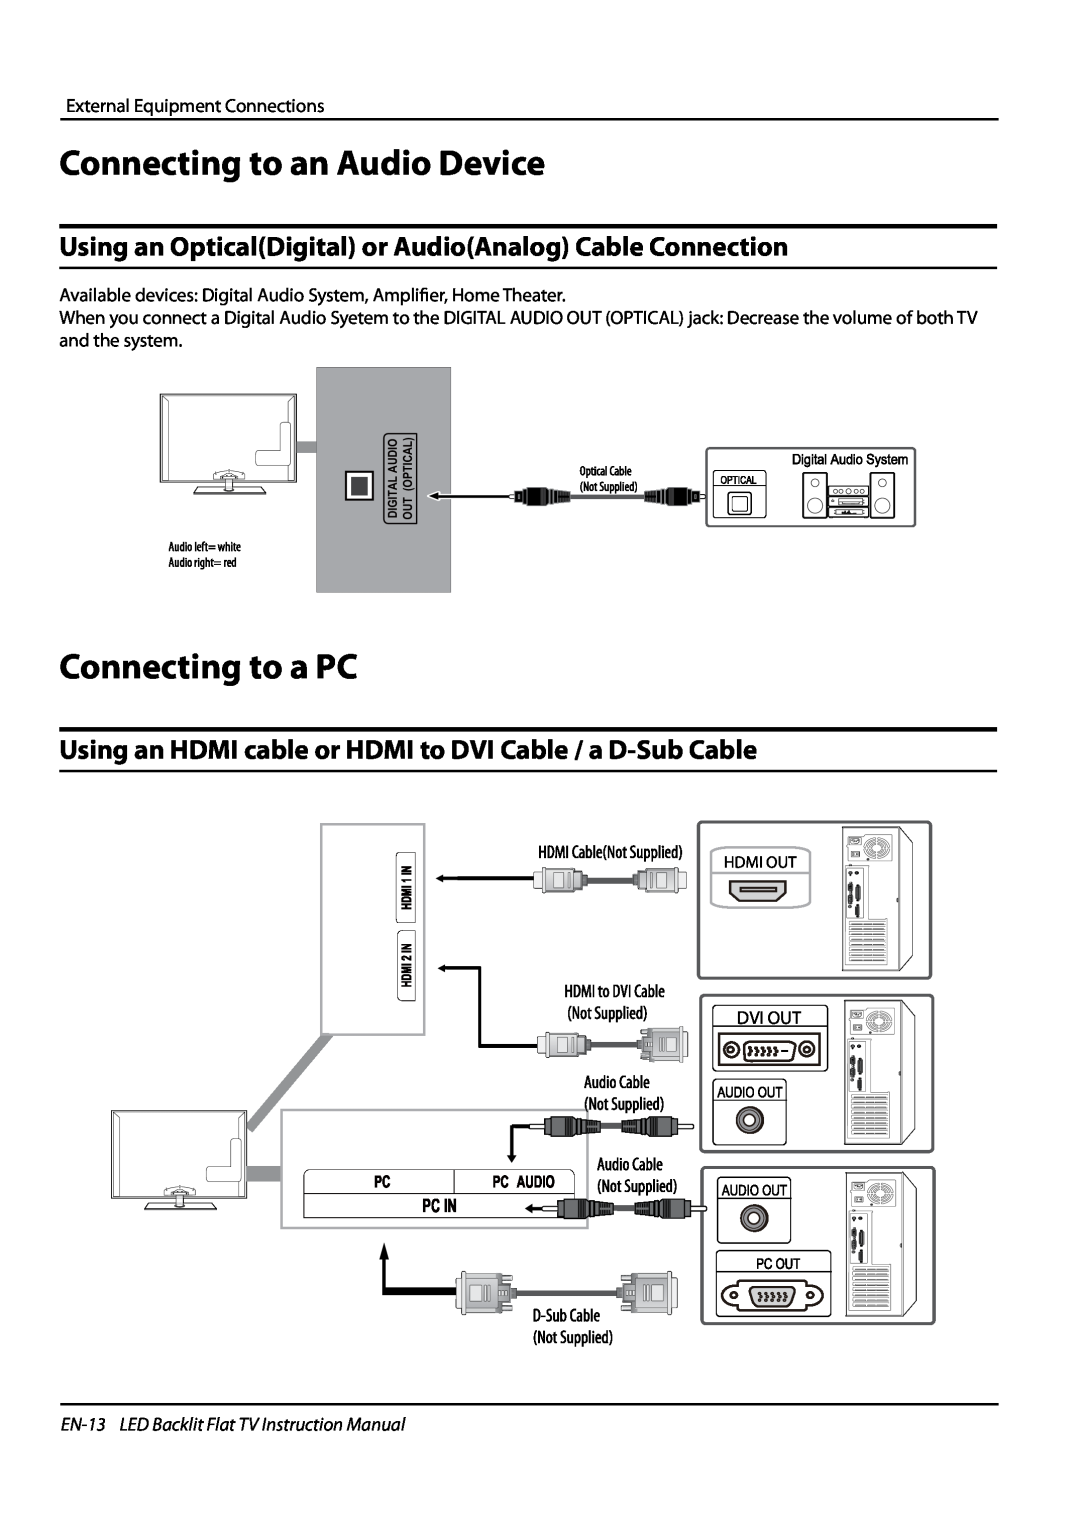 Haier LE42H5000 Connecting to an Audio Device, Connecting to a PC, Using an OpticalDigital or AudioAnalog Cable Connection 